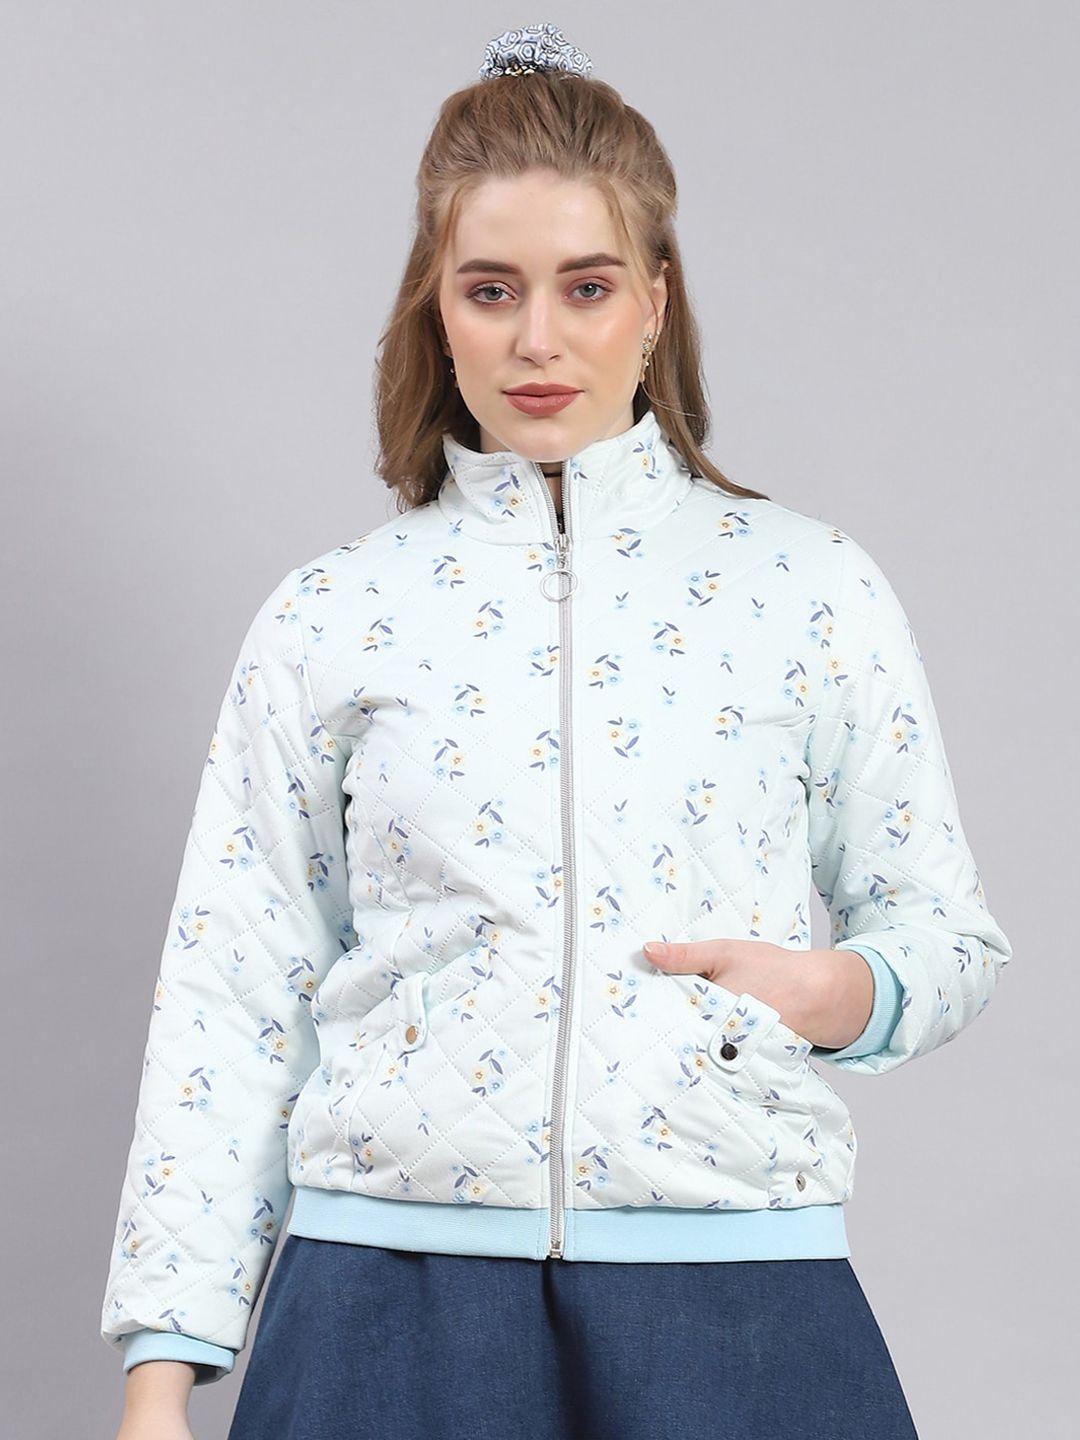 monte carlo floral printed lightweight bomber jacket